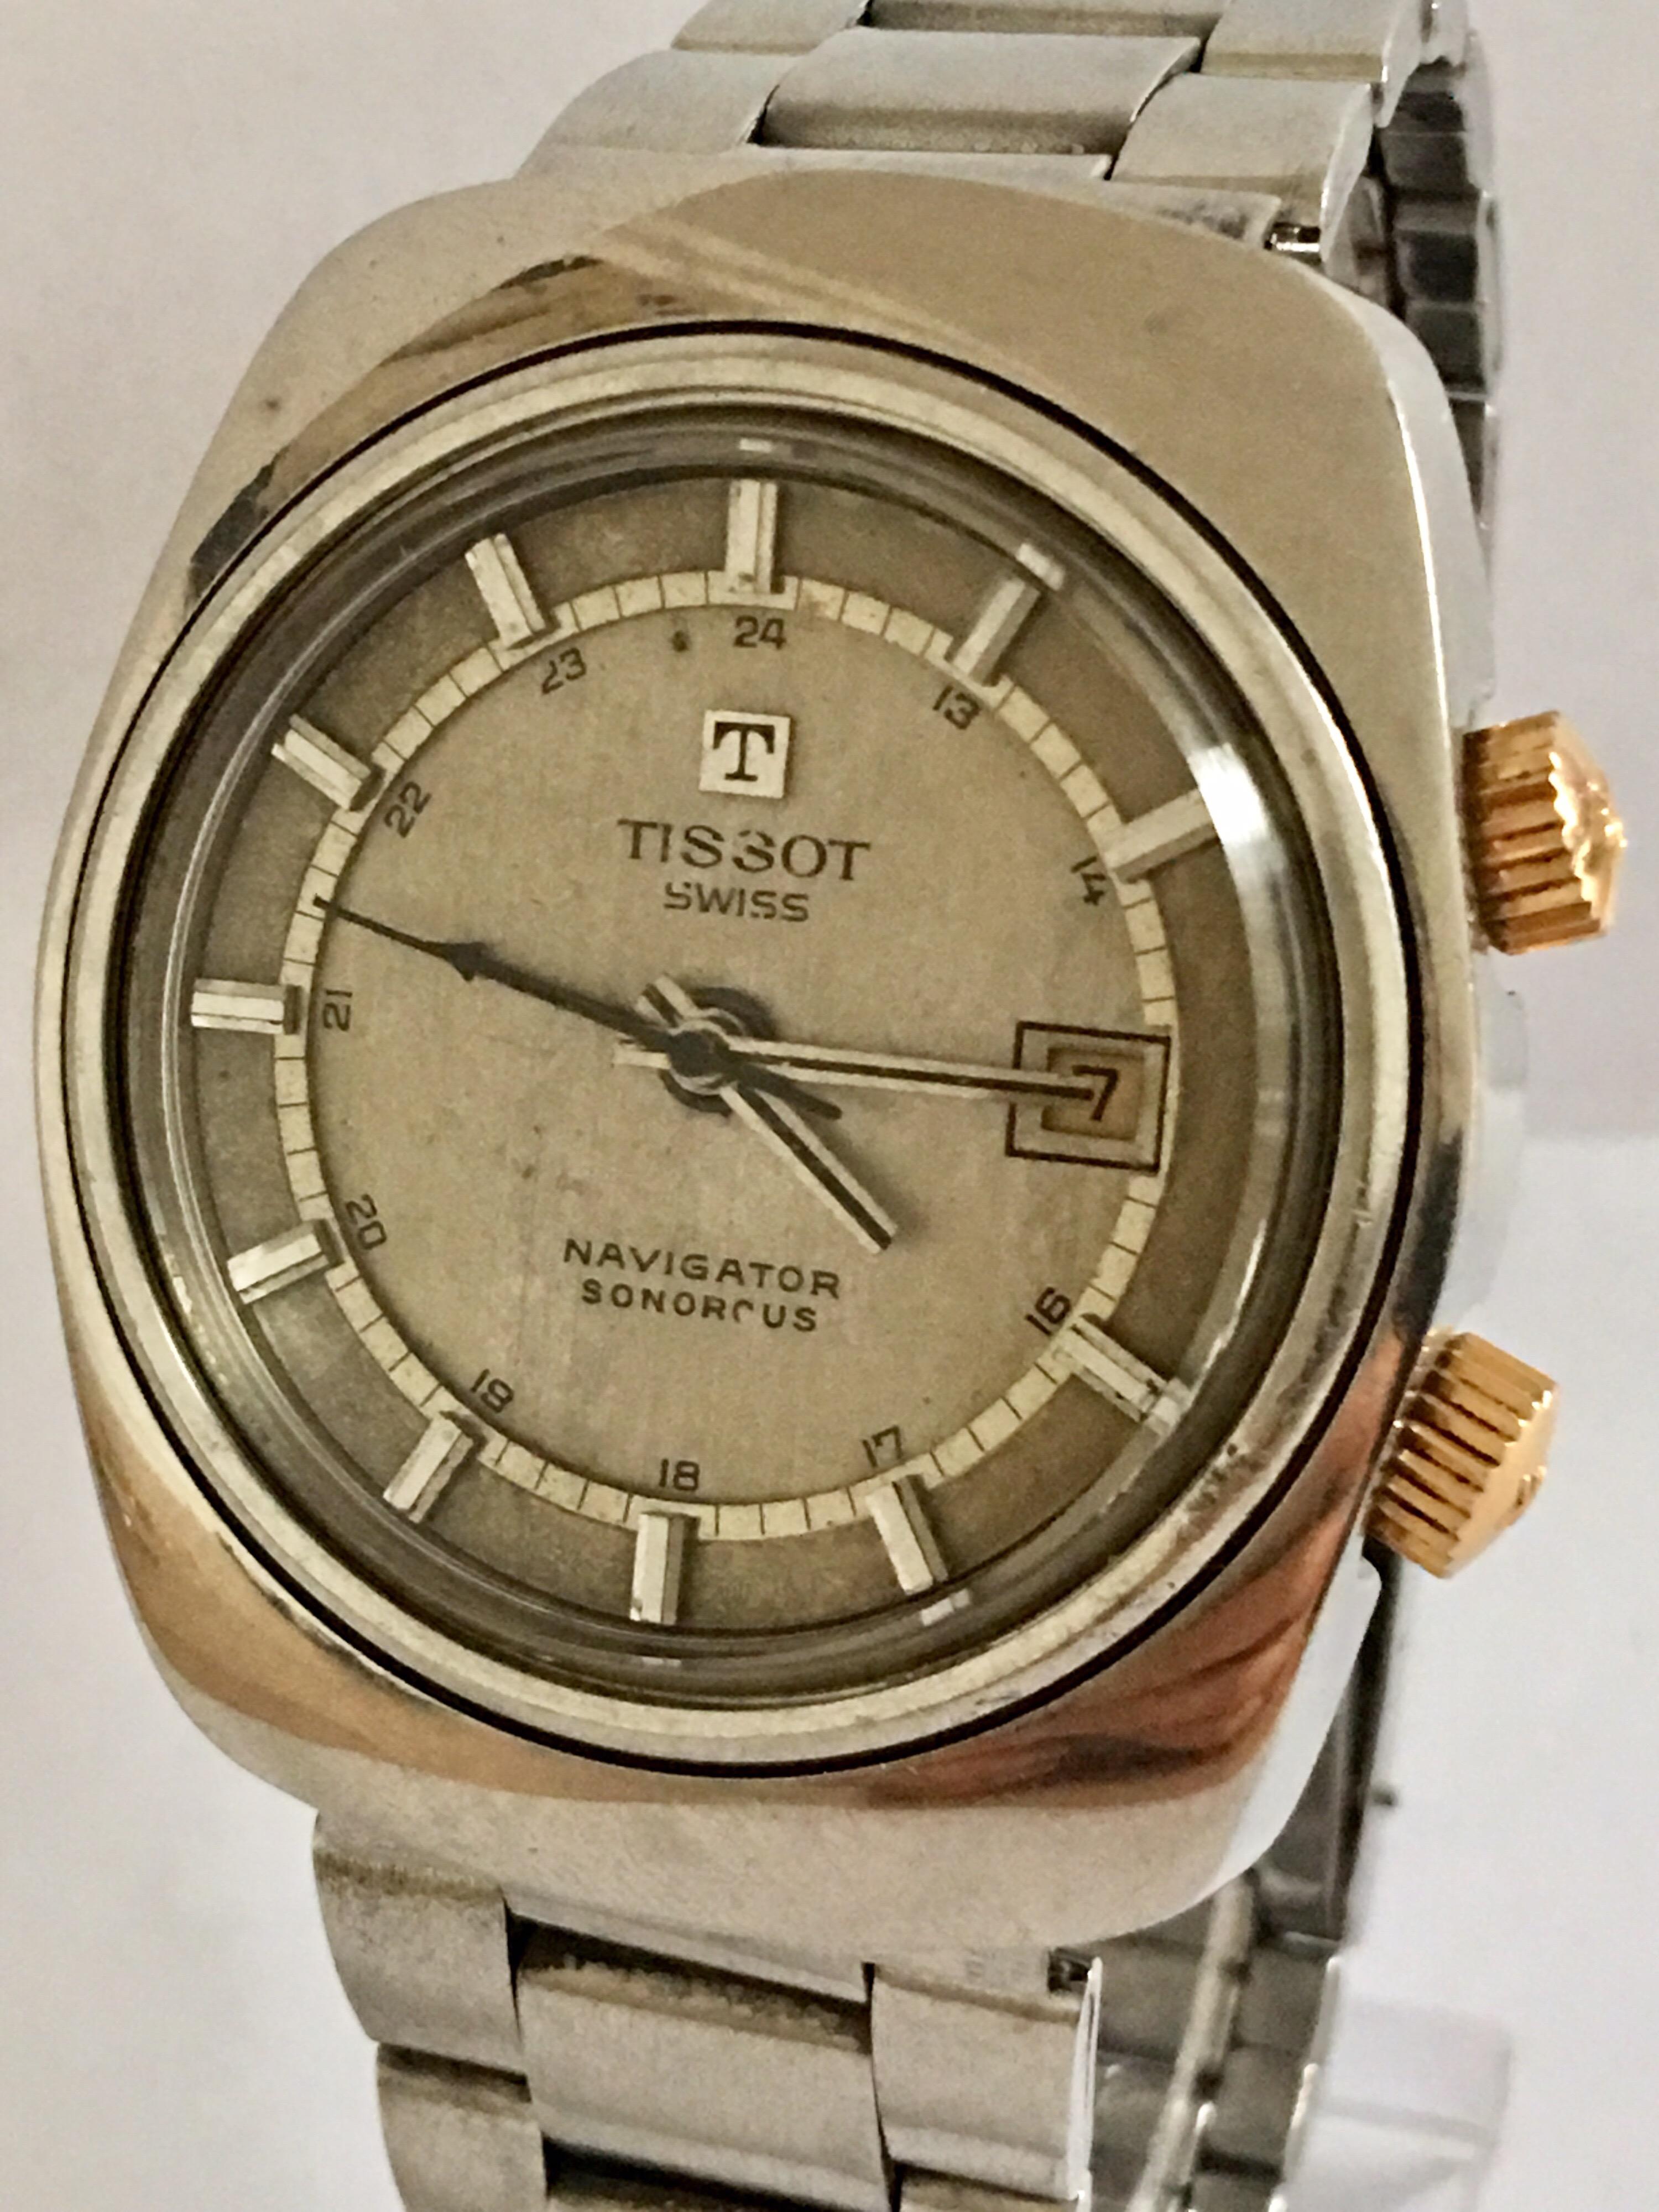 This Rare Vintage 37mm wide and 44mm long cushion shaped, 33mm face diameter mechanical Alarm watch is in good Working condition and is running well. Visible signs of ageing and wear with light surface marks on the glass, watch strap and on the